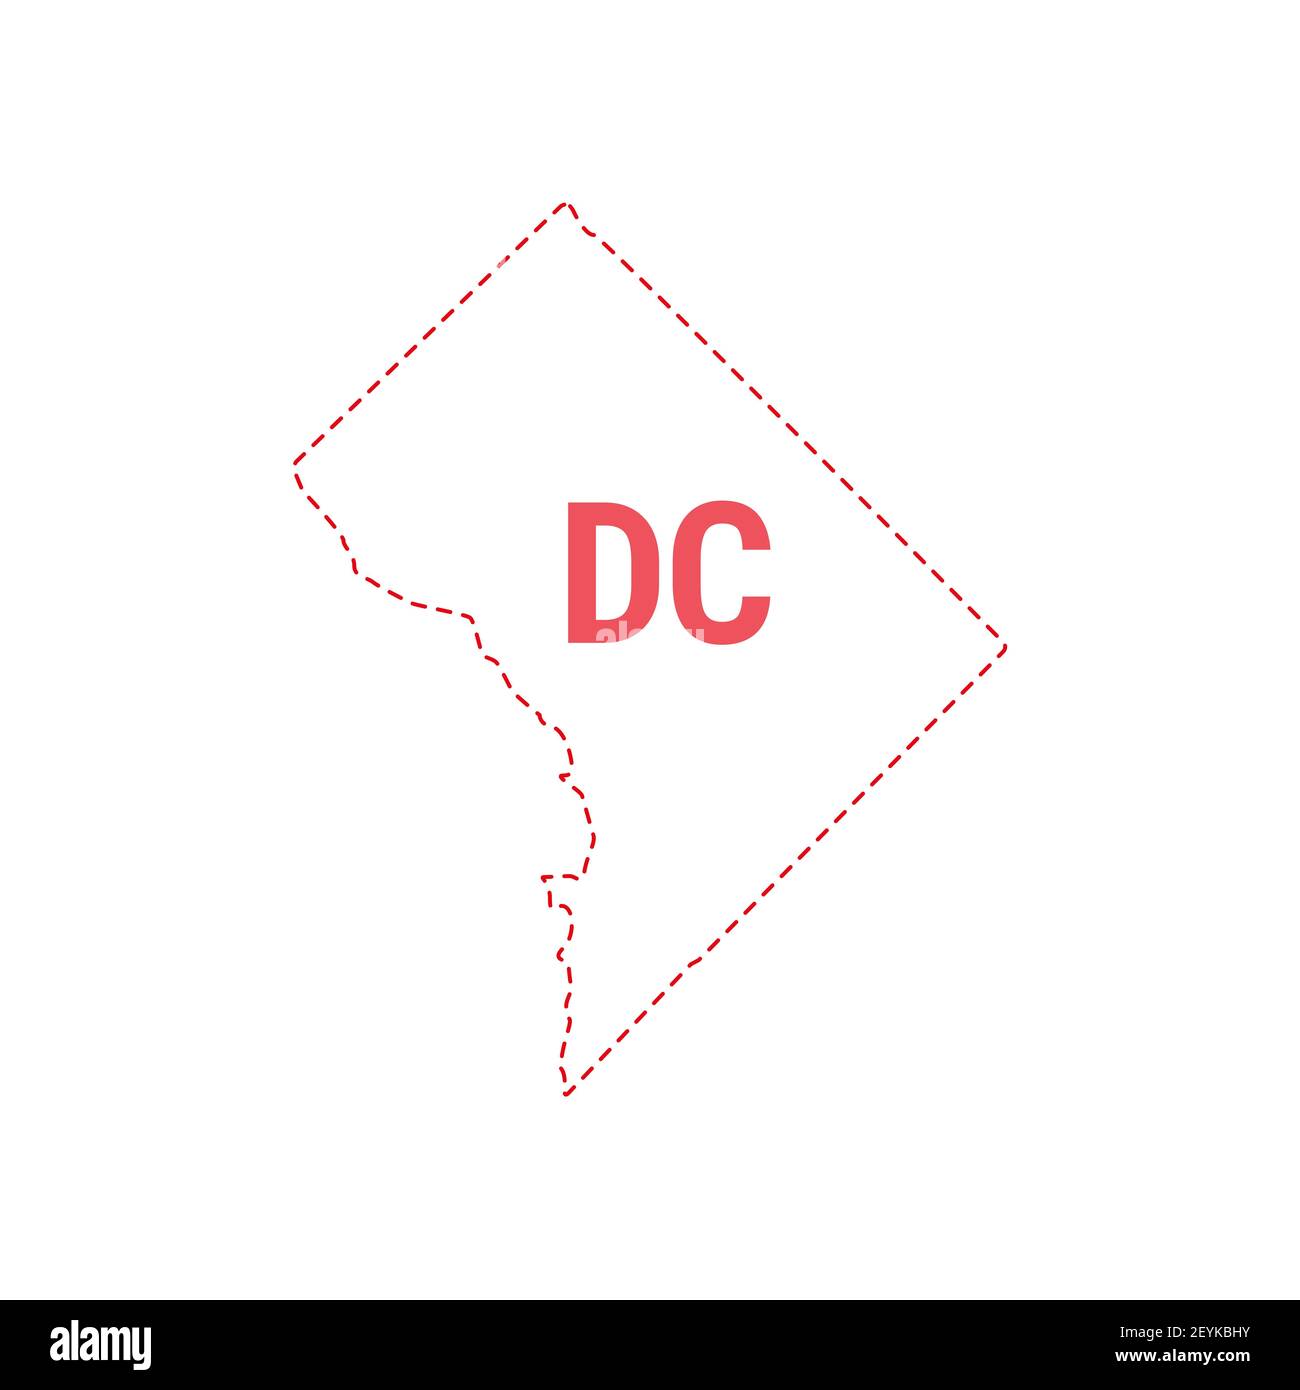 Washington, DC or District of Columbia US state map outline dotted border. illustration. Two-letter state abbreviation. Stock Photo